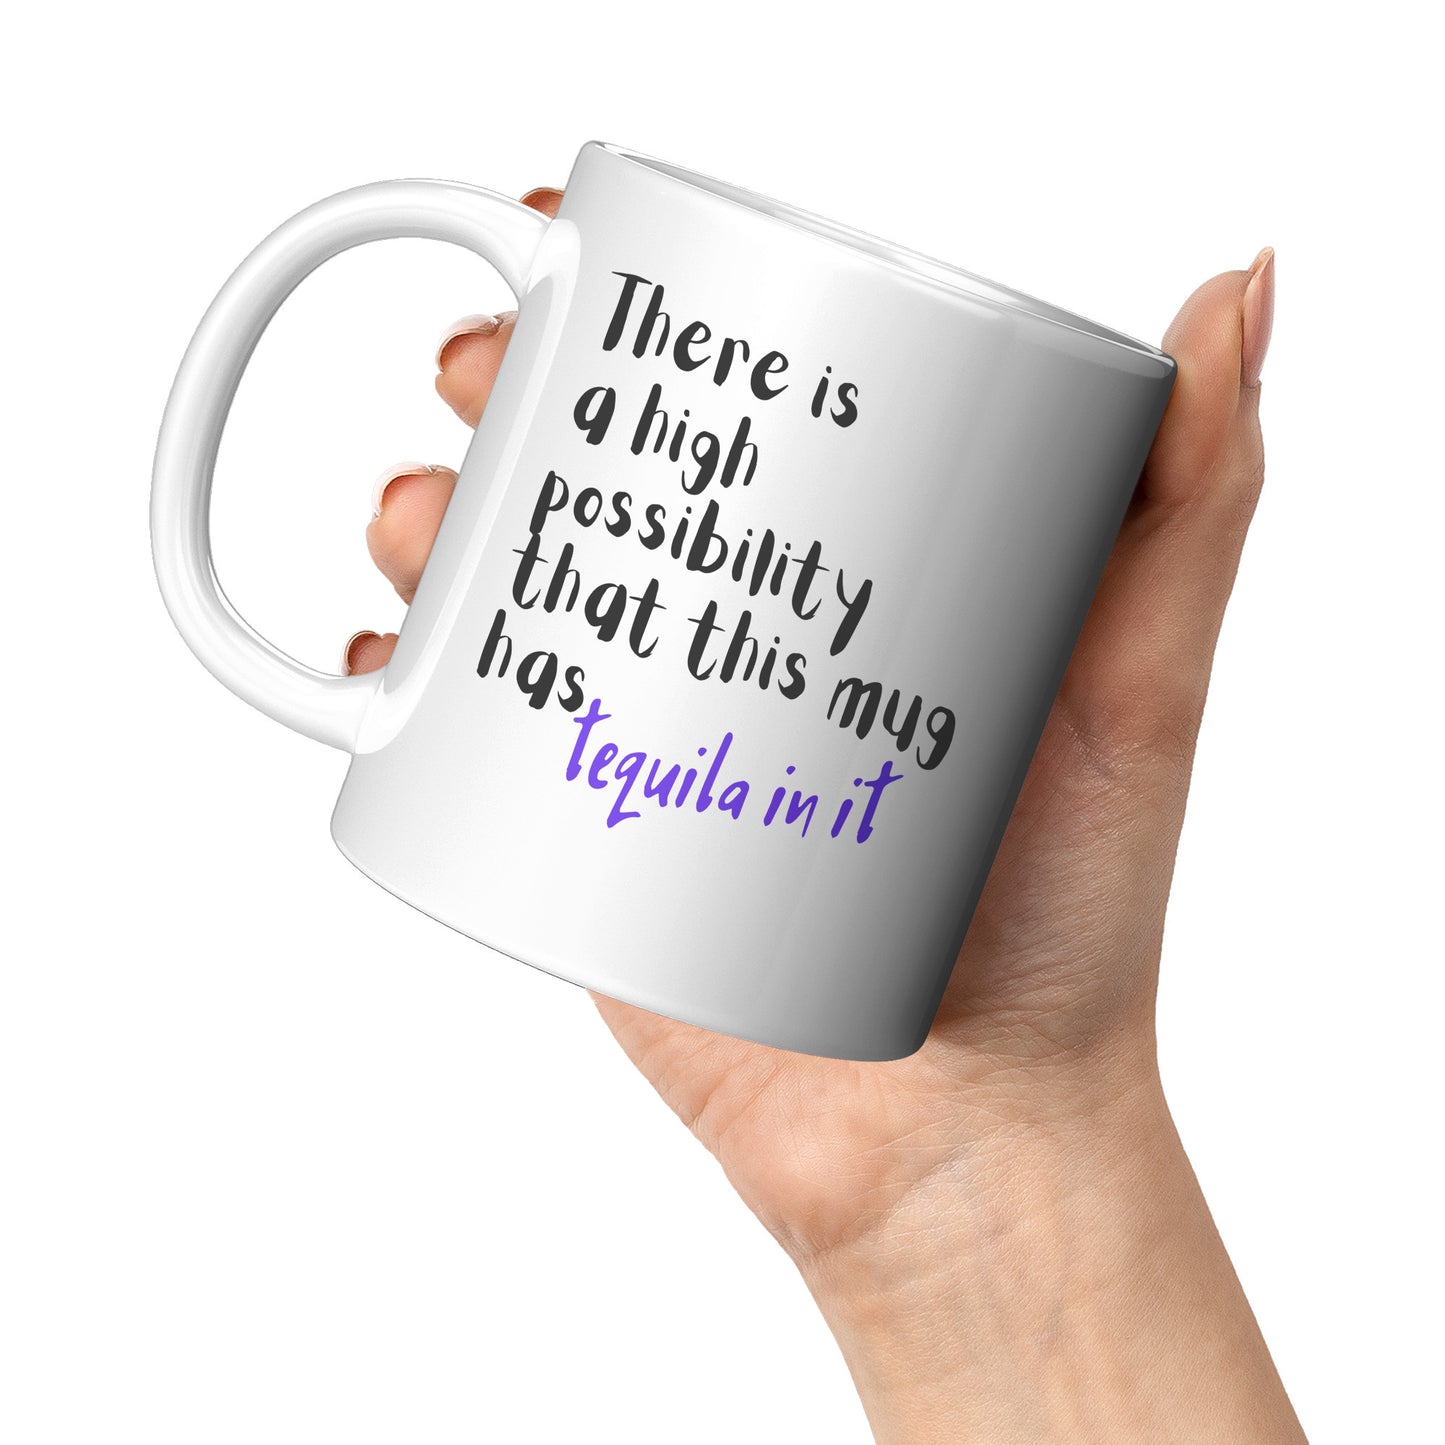 Comical Mug for the Tequila Drinker that Loves Coffee as Well